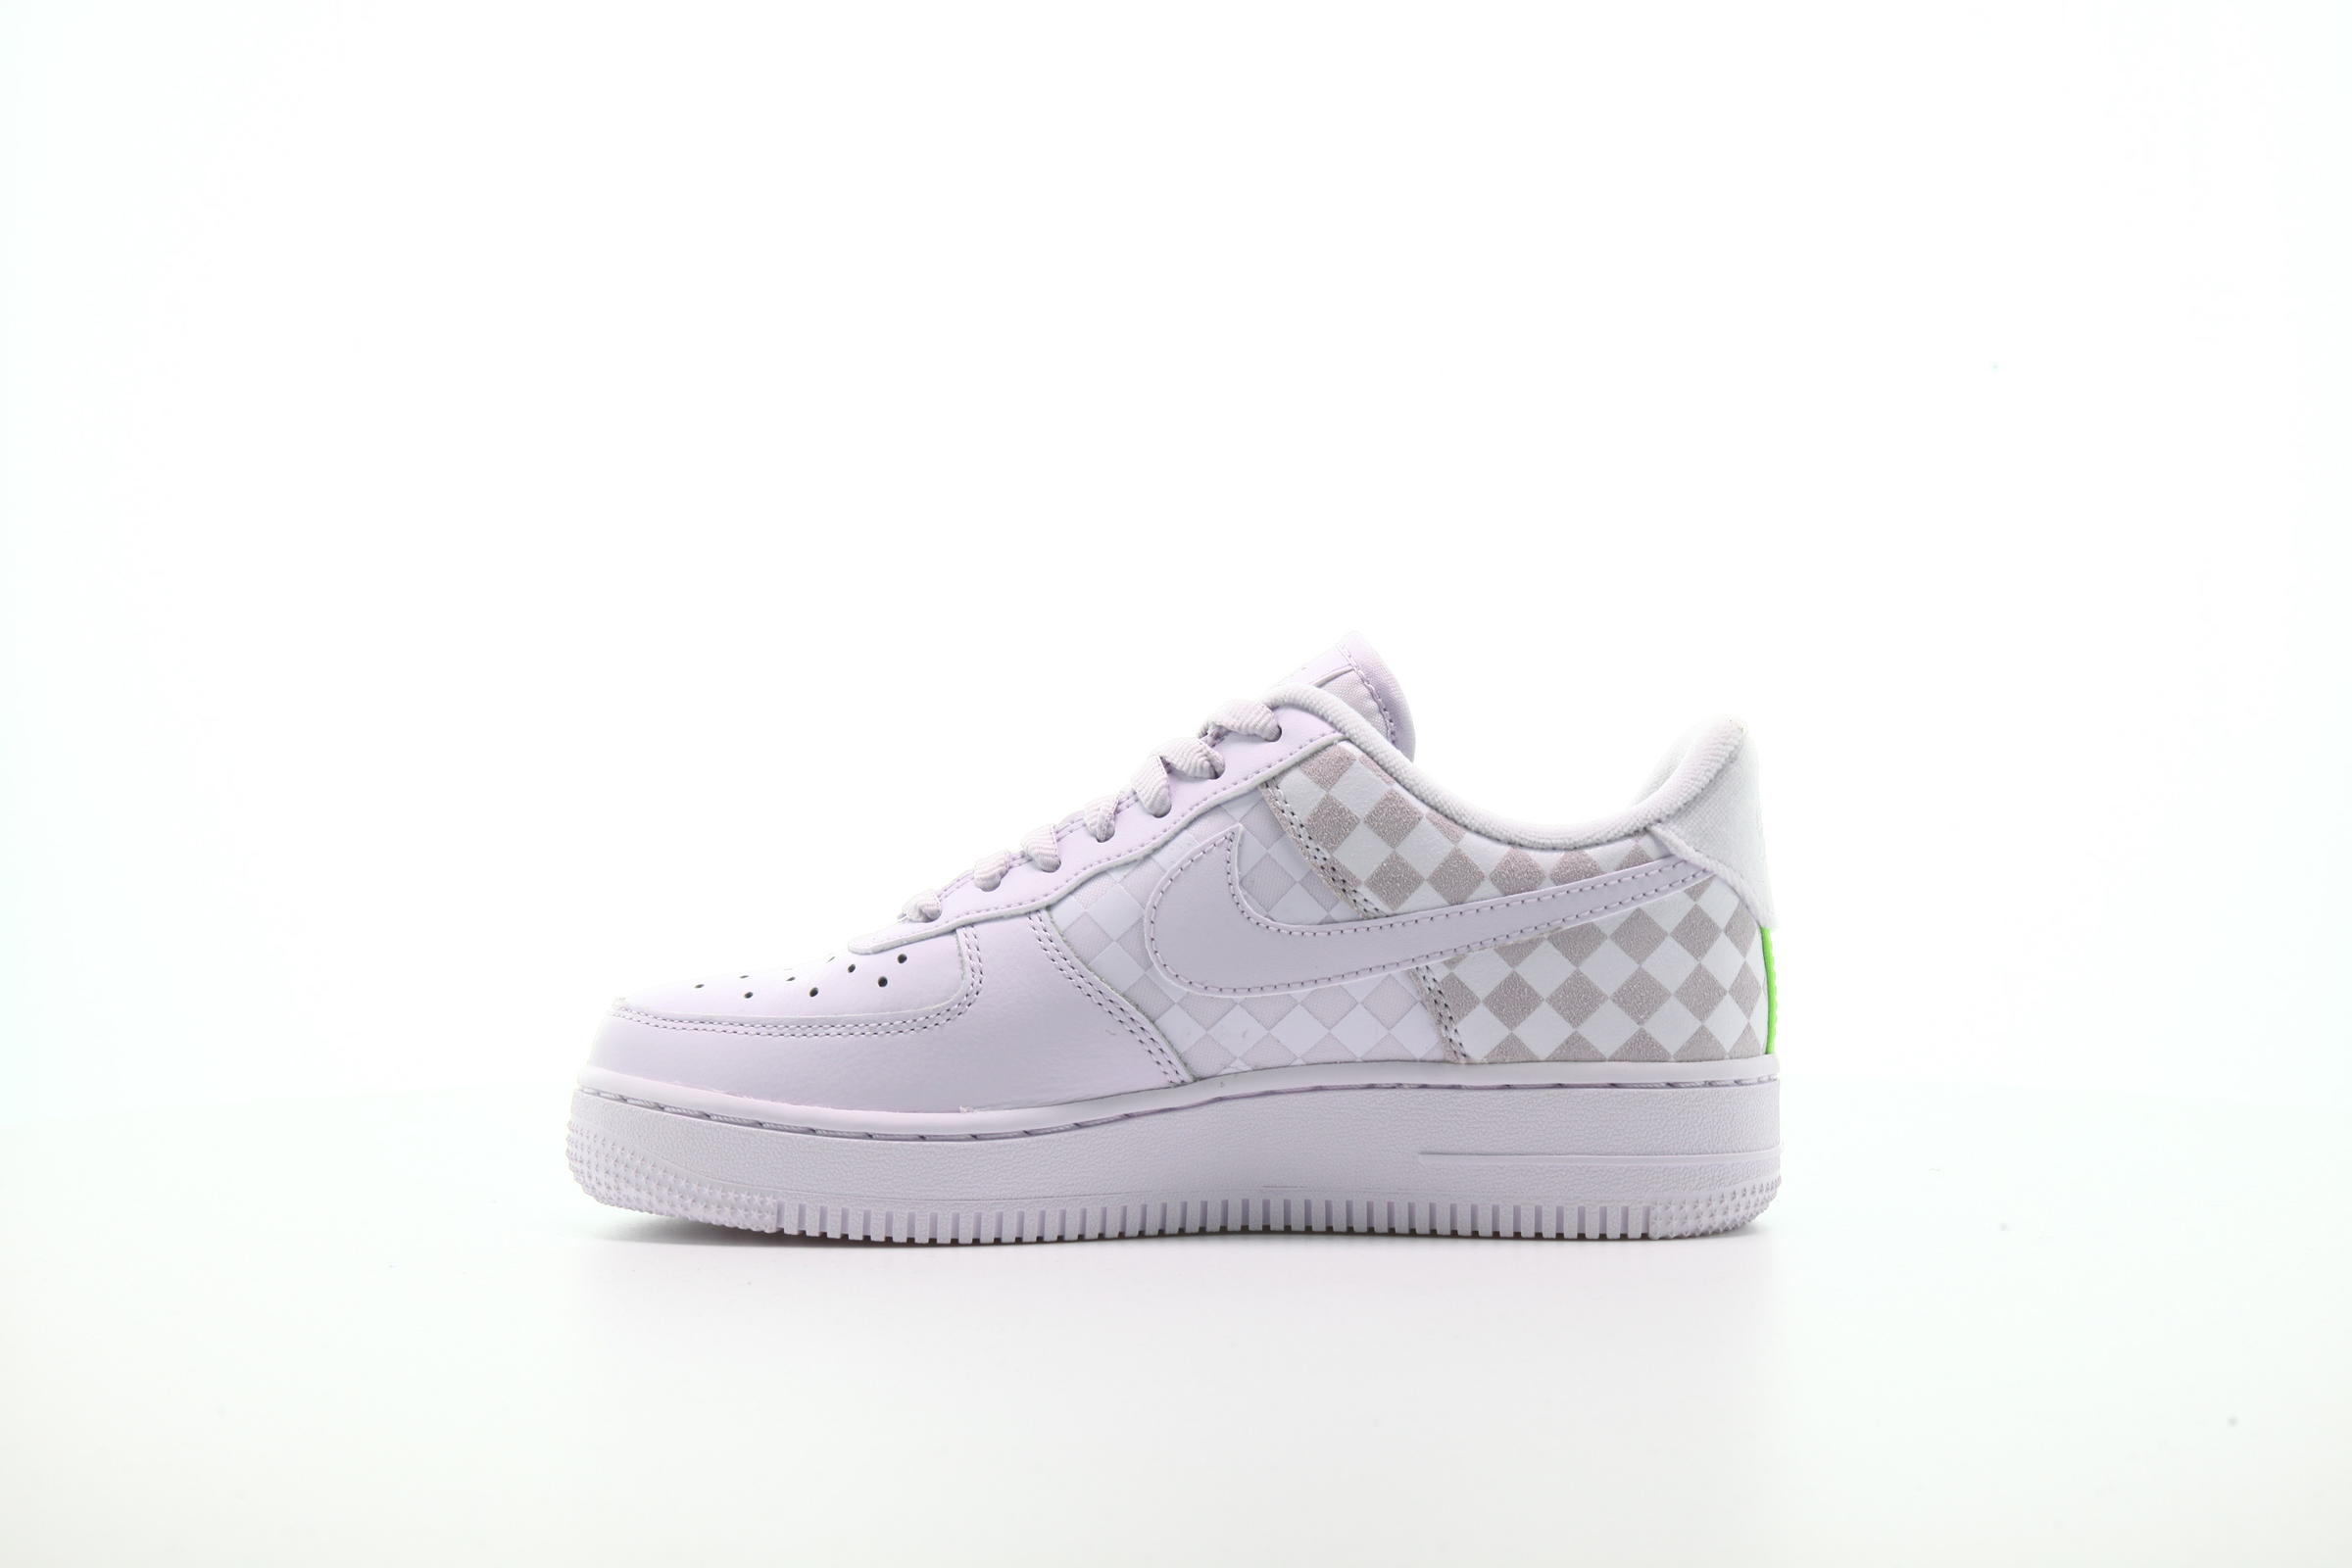 Nike WMNS Air Force 1 Low "Barely Grape"